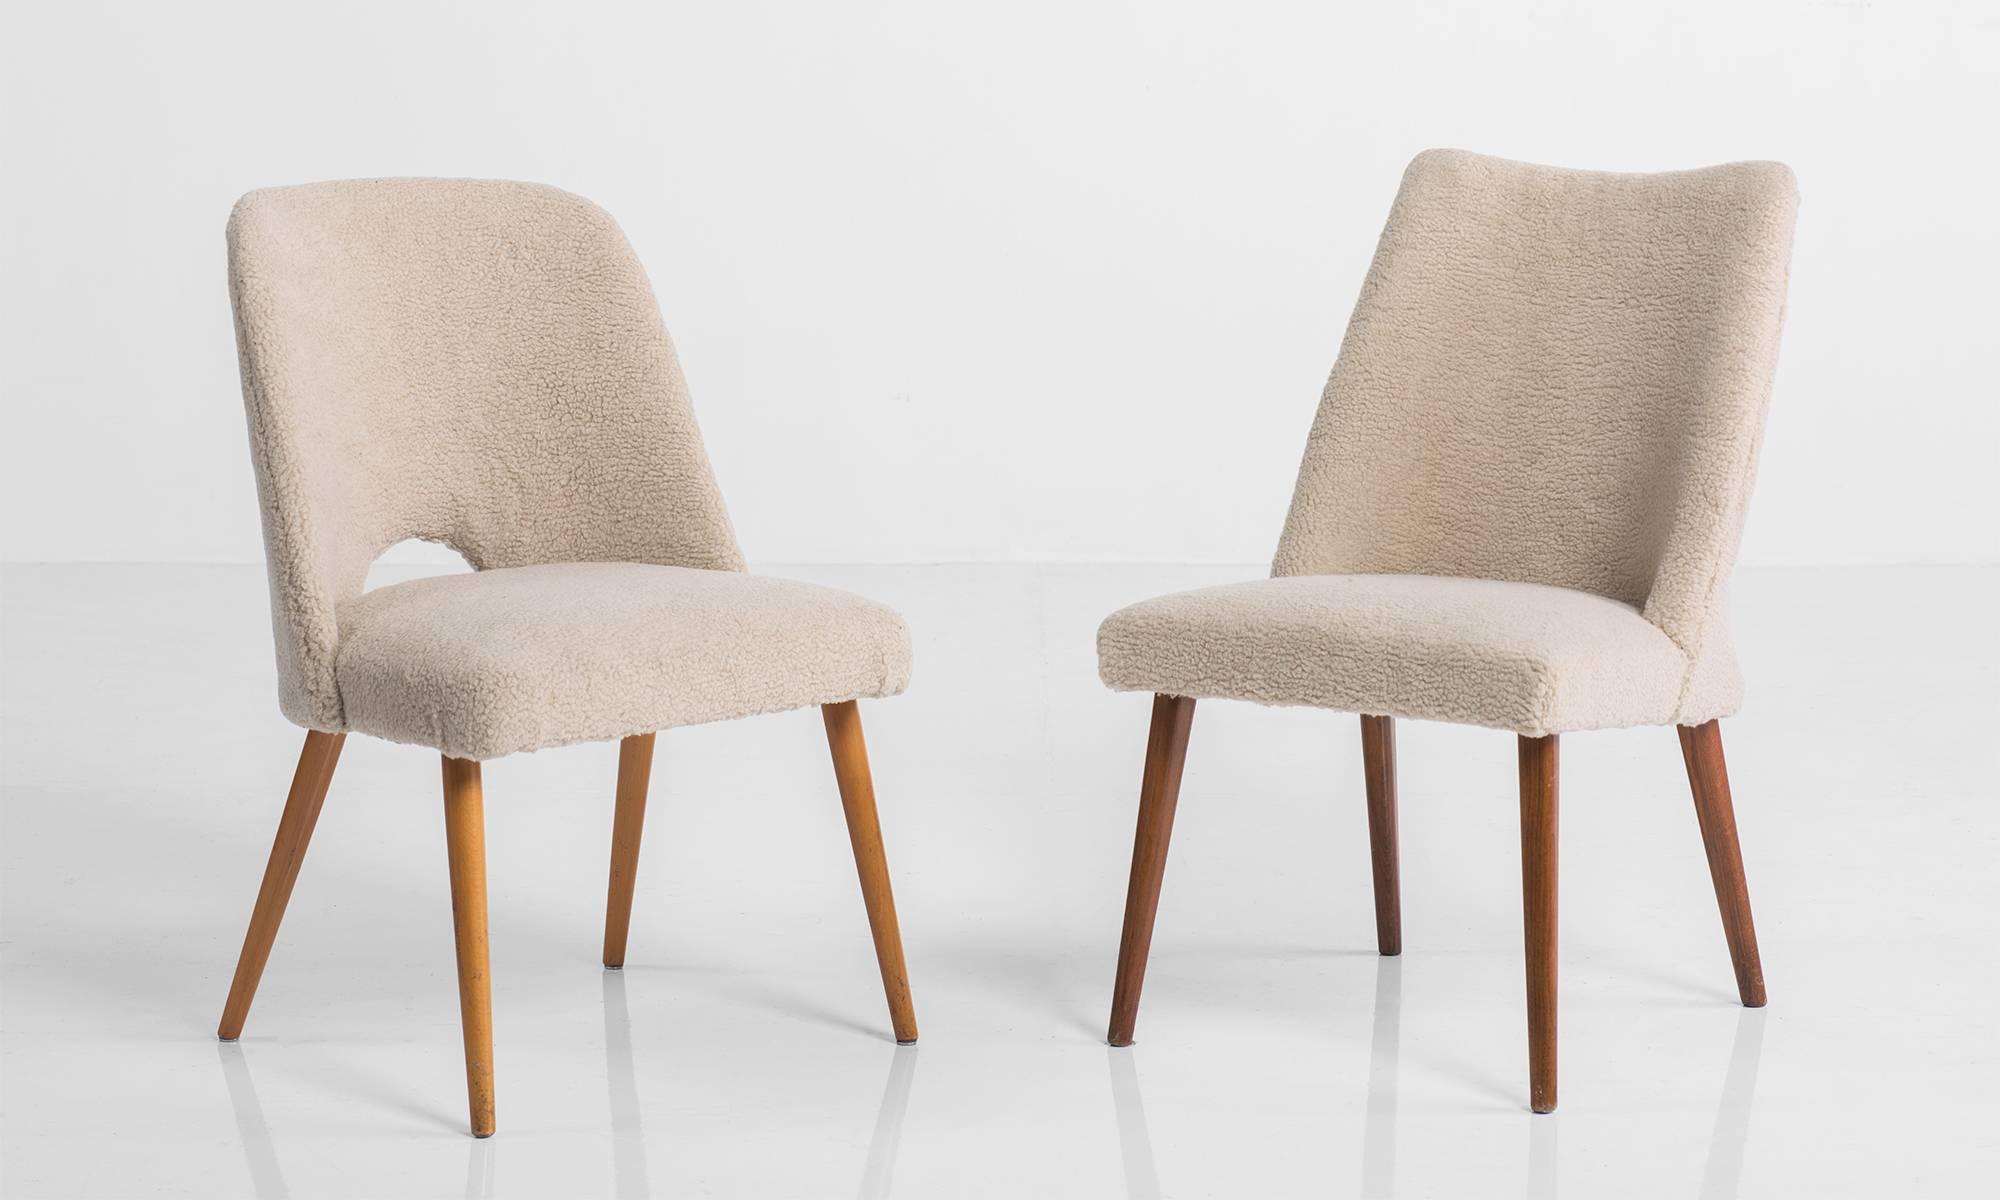 Unique set of chairs with soft faux wool upholstery on tapered teak legs; two end chairs have small cut-out in the lower back as an additional design element, France, circa 1960.